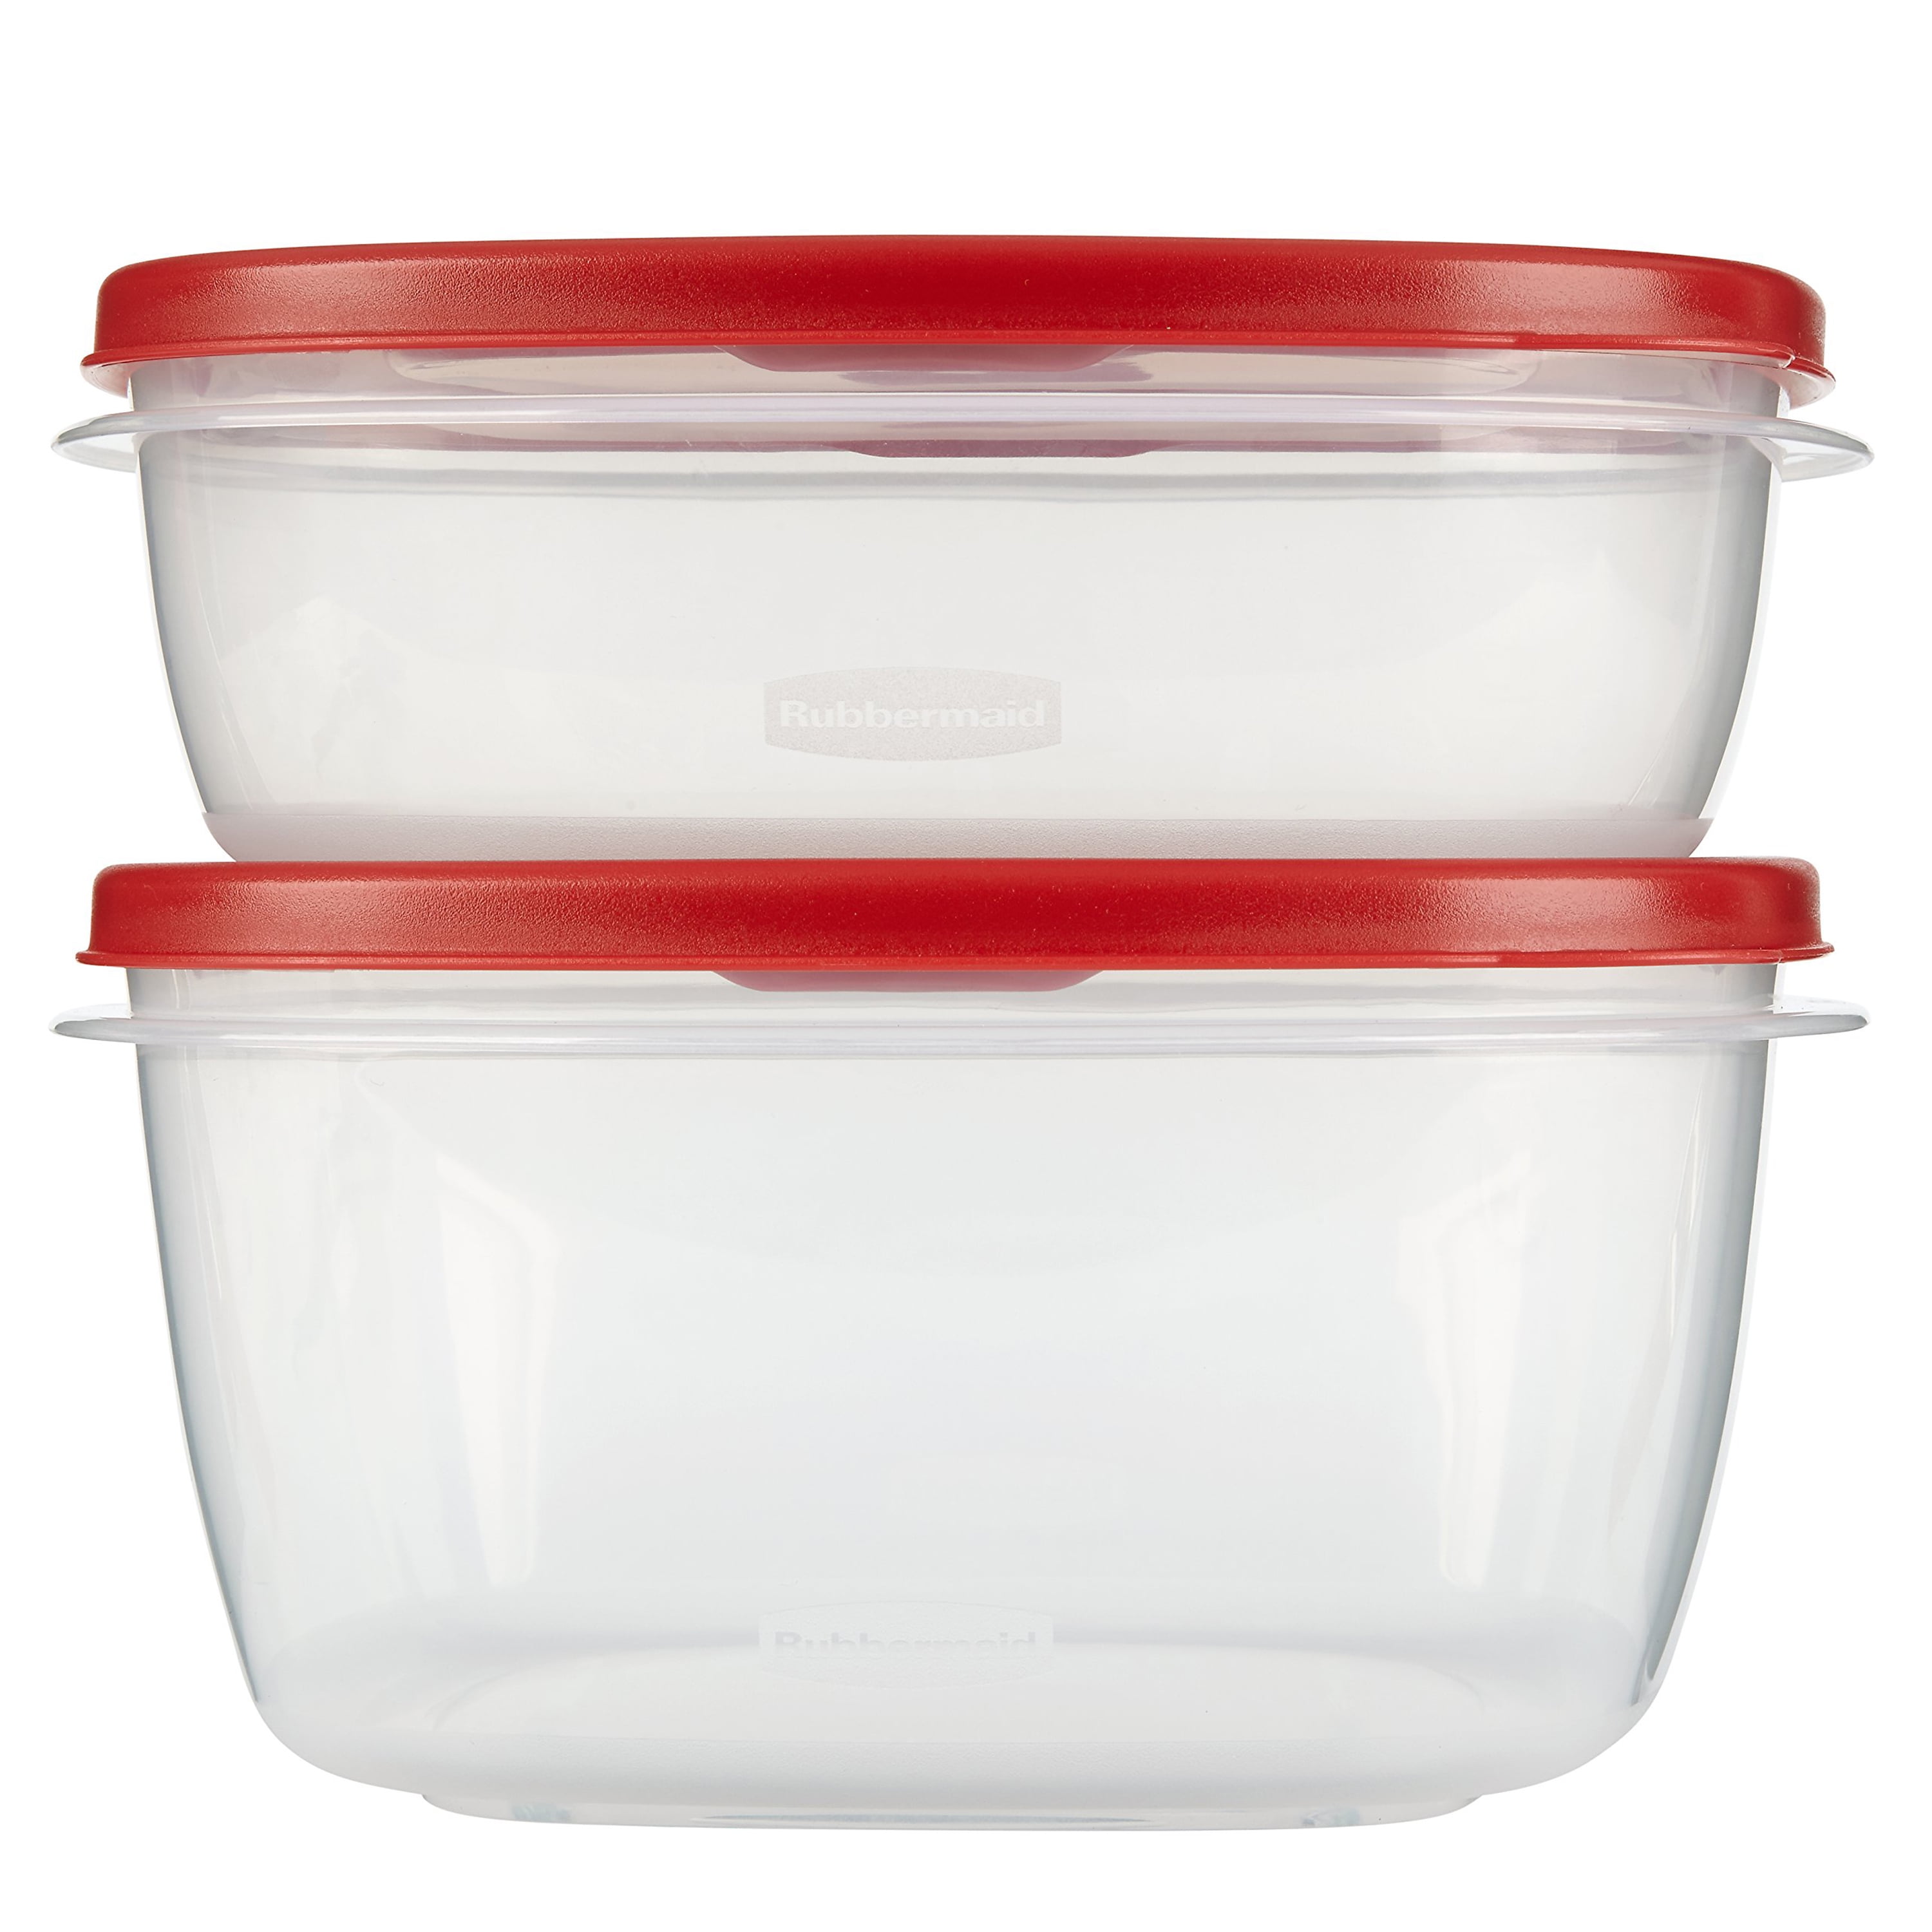 Rubbermaid, Kitchen, Rubbermaid Glass Food Storage Containers Easy Find  Vacuum Sealed Lids Set Of 4